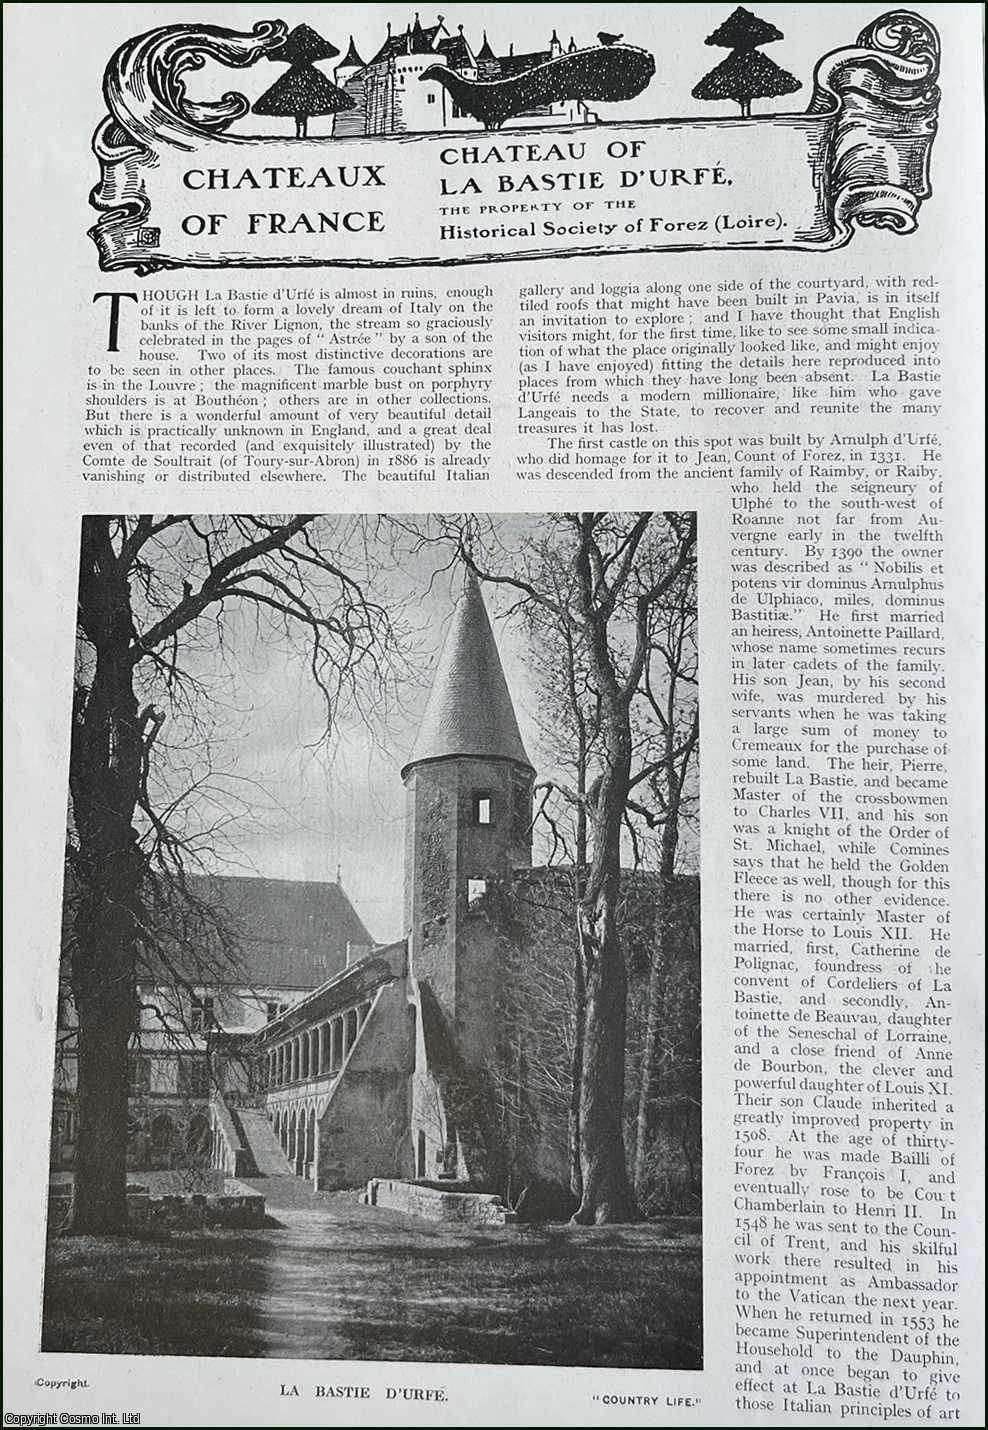 Country Life Magazine - Chateau of La Bastie D'urfe. Several pictures and accompanying text, removed from an original issue of Country Life Magazine, 1916.